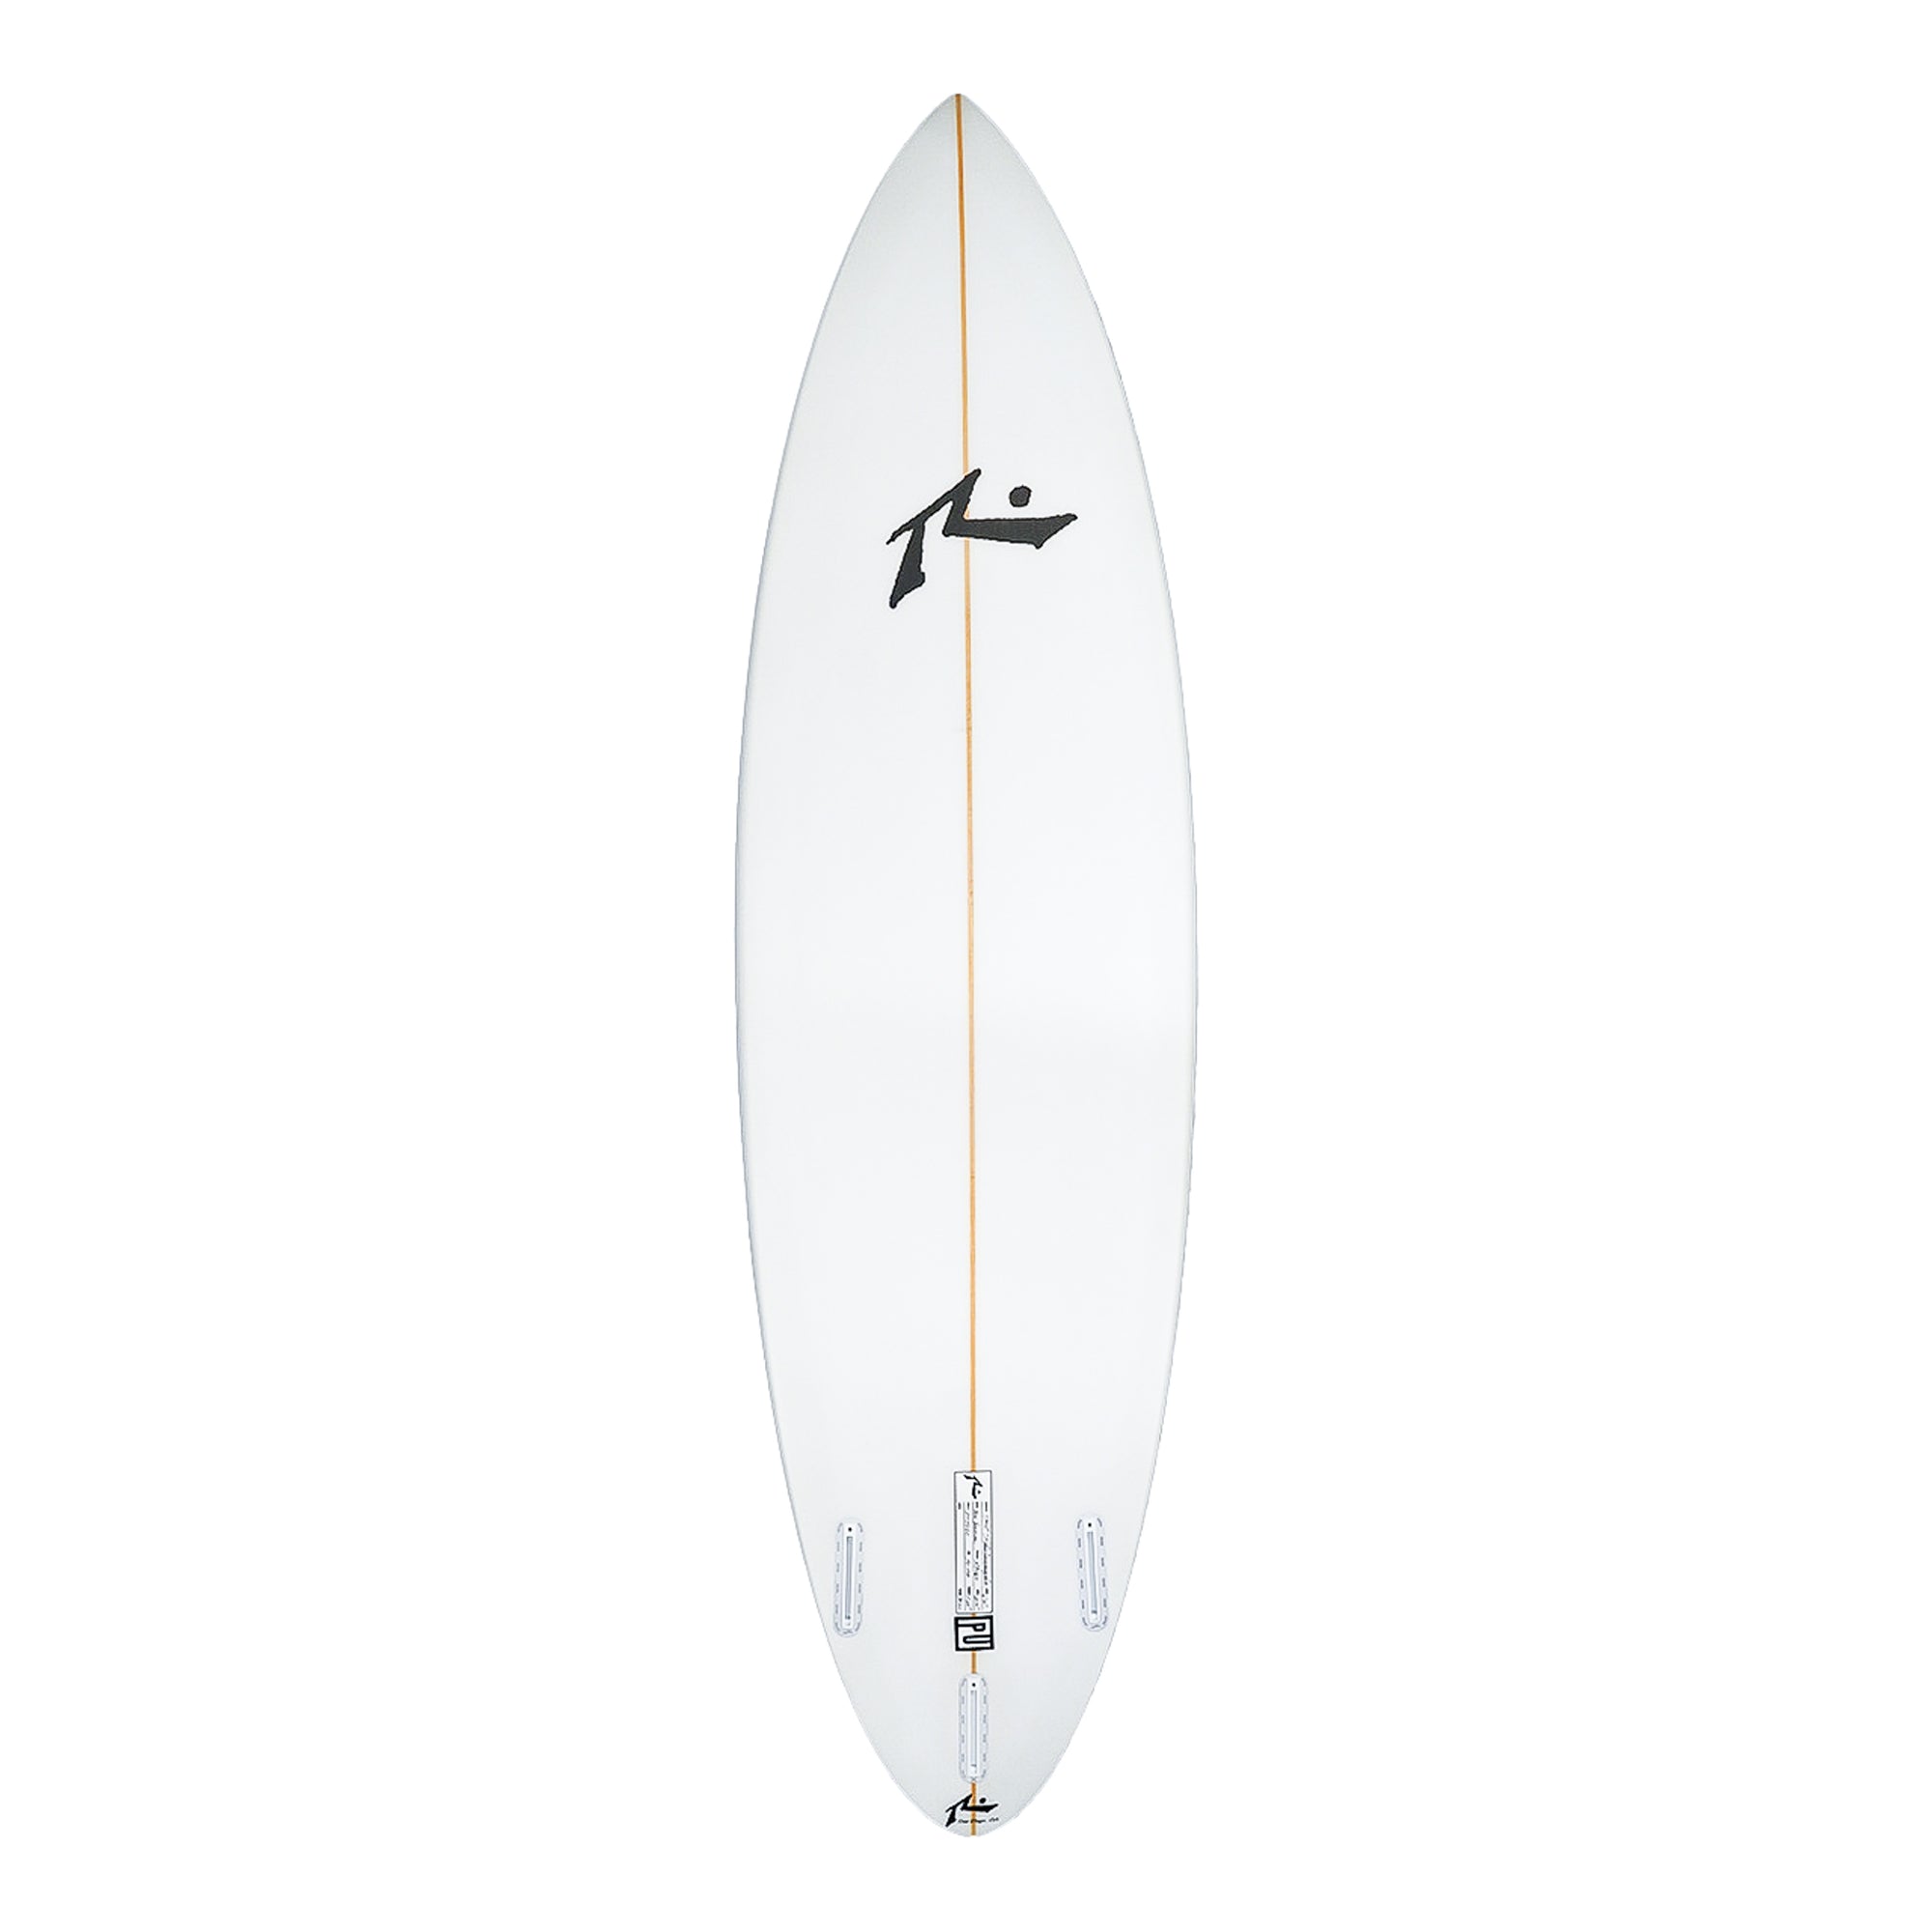 New Traveler - Made To Order - Step Up - Rusty Surfboards - Deck View